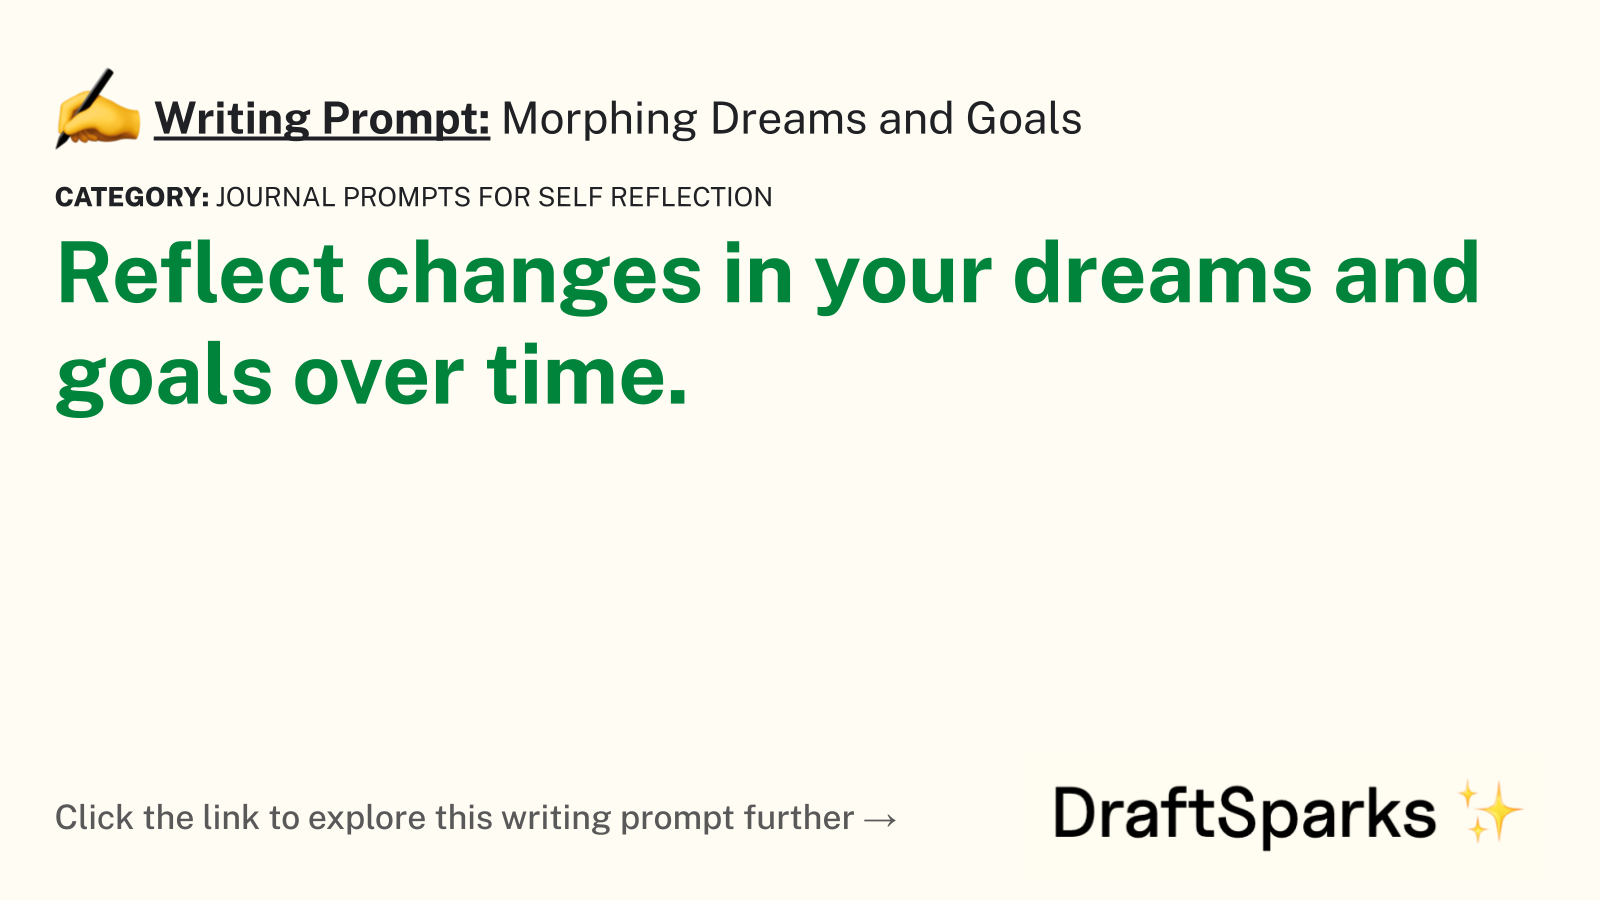 Morphing Dreams and Goals